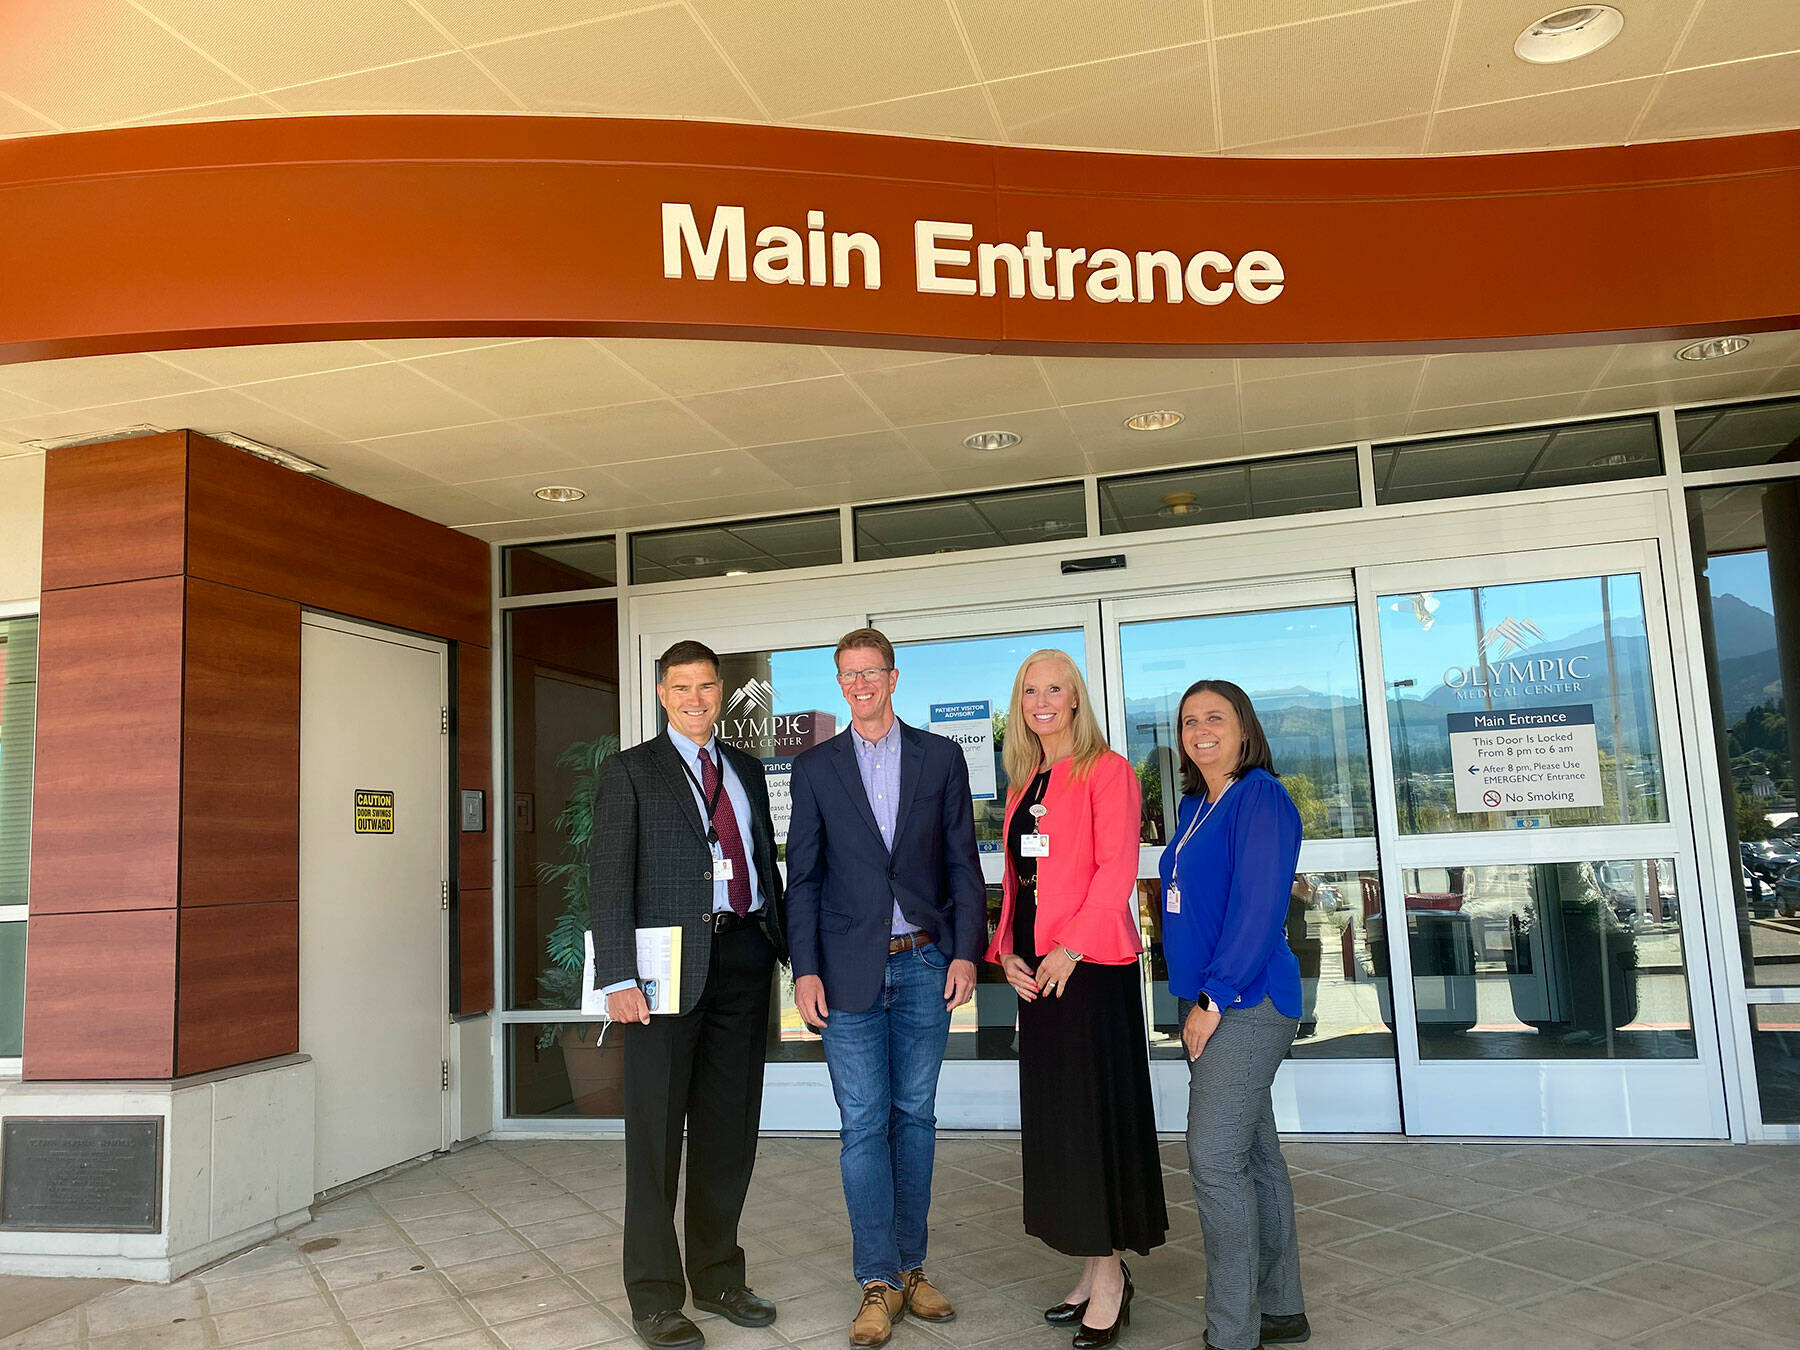 U.S. Rep. Derek Kilmer, second from left, tours Olympic Medical Center on Monday, hearing from hospital leadership CEO Darryl Wolfe, left of Kilmer; and, to the right, Human Resources Manager Jennifer Burkhardt and Communications Manager Bobby Beeman. (Ken Park/Peninsula Daily News)